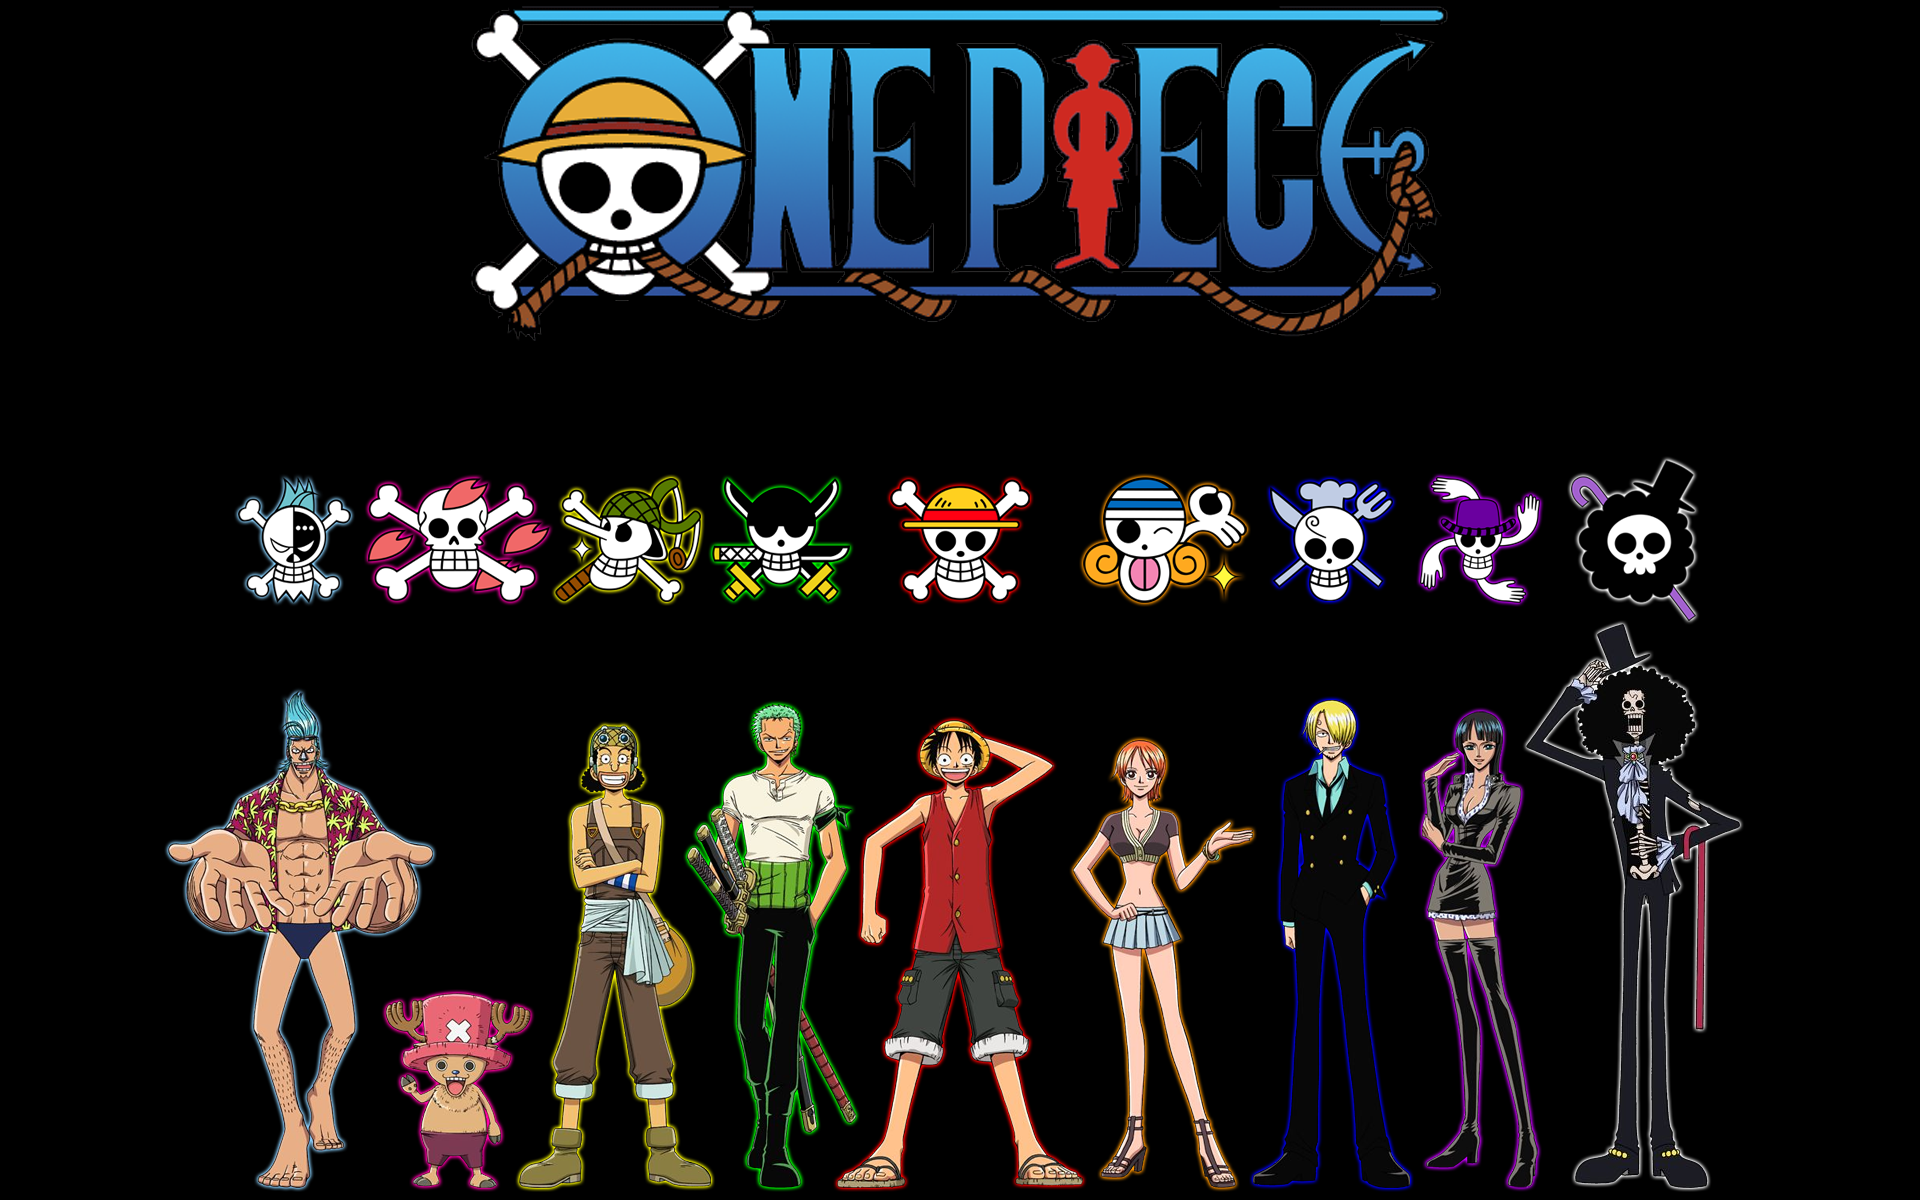 1920x1200 px One Piece Widescreen Image | Best Photos, v.77